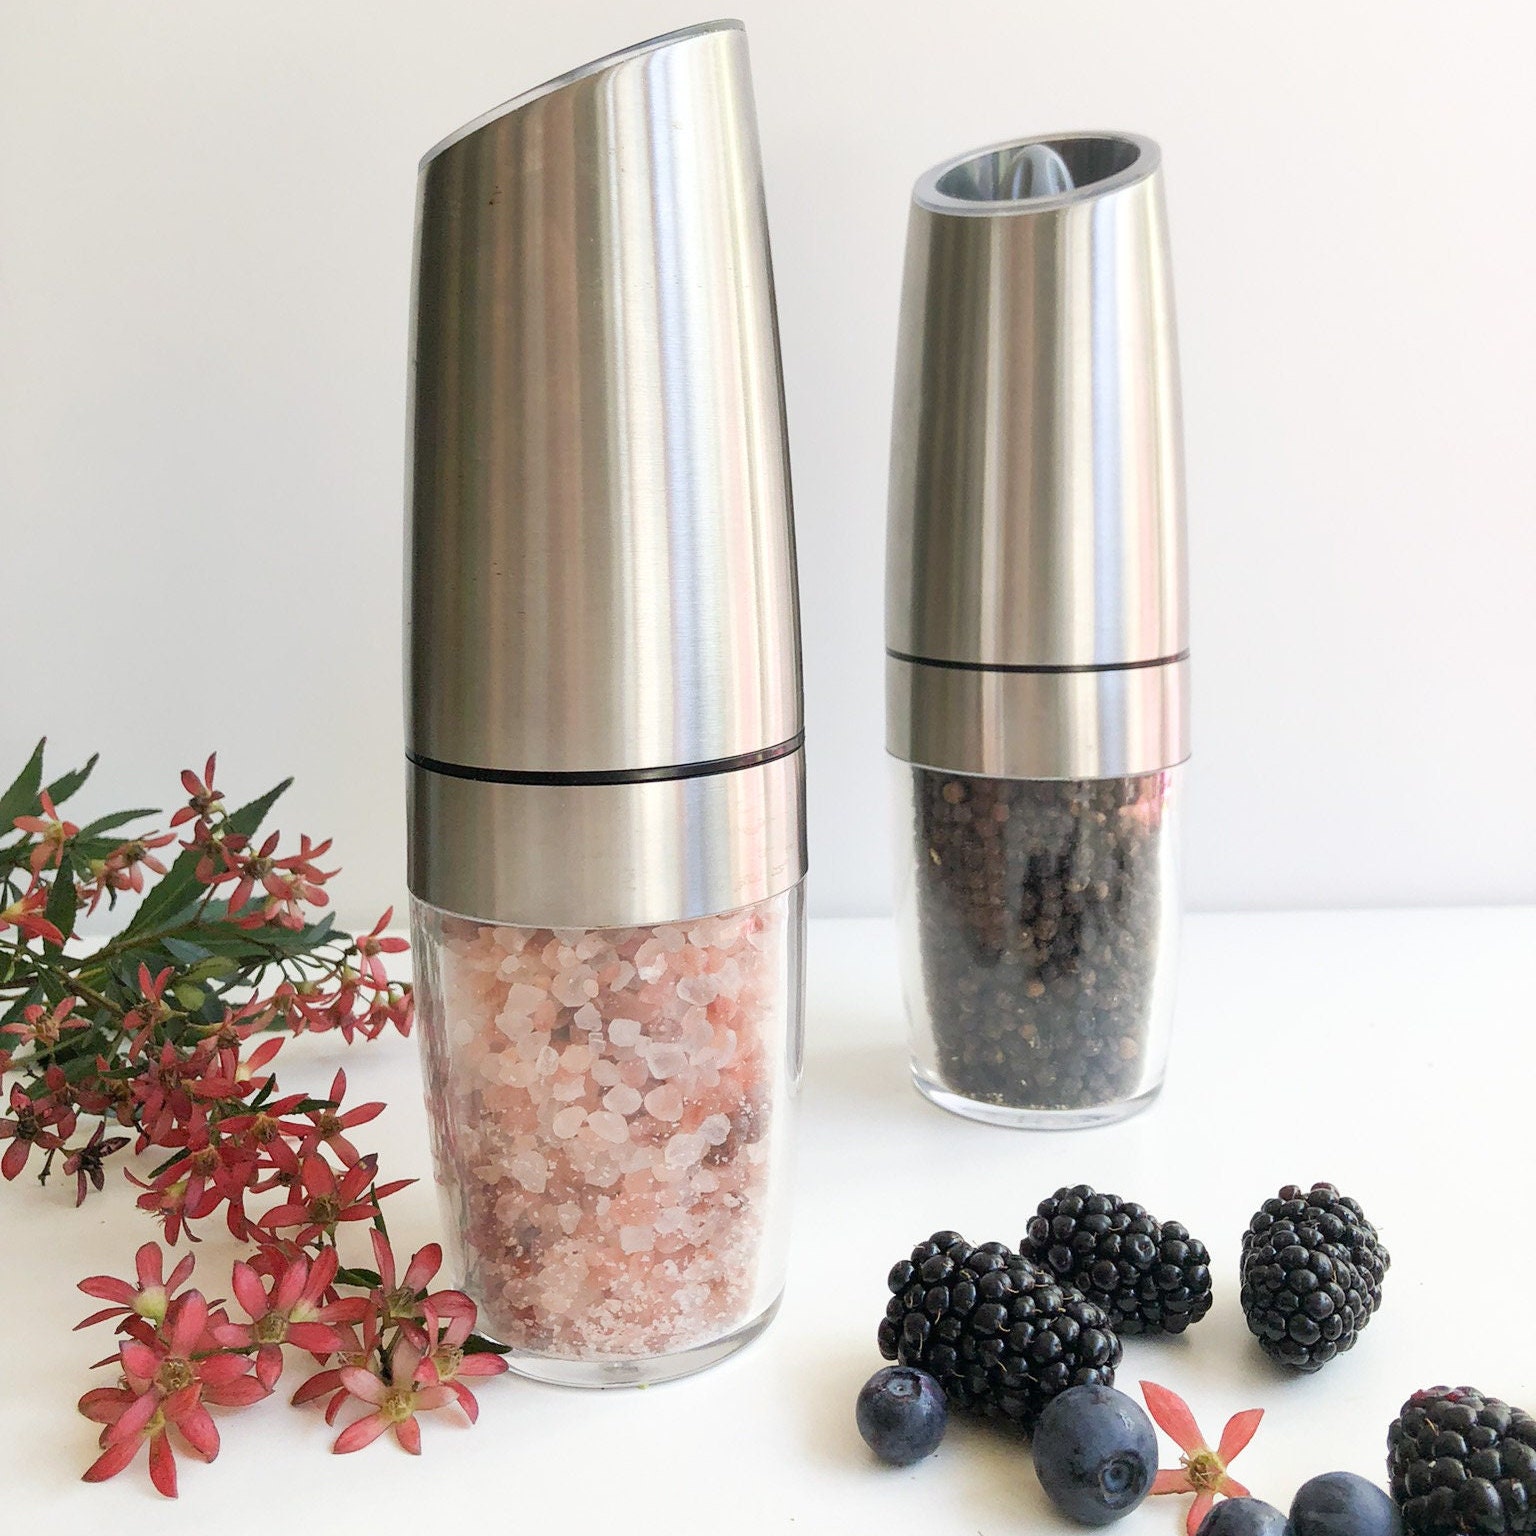 Electric Salt and Pepper Grinder Set - Battery Operated Stainless Steel  Salt&Pepper Mills(2) by Flafster Kitchen -Tall Power Shakers with Stand -  Ceramic Grinders with lights and Adjustable Coarseness, Furniture & Home